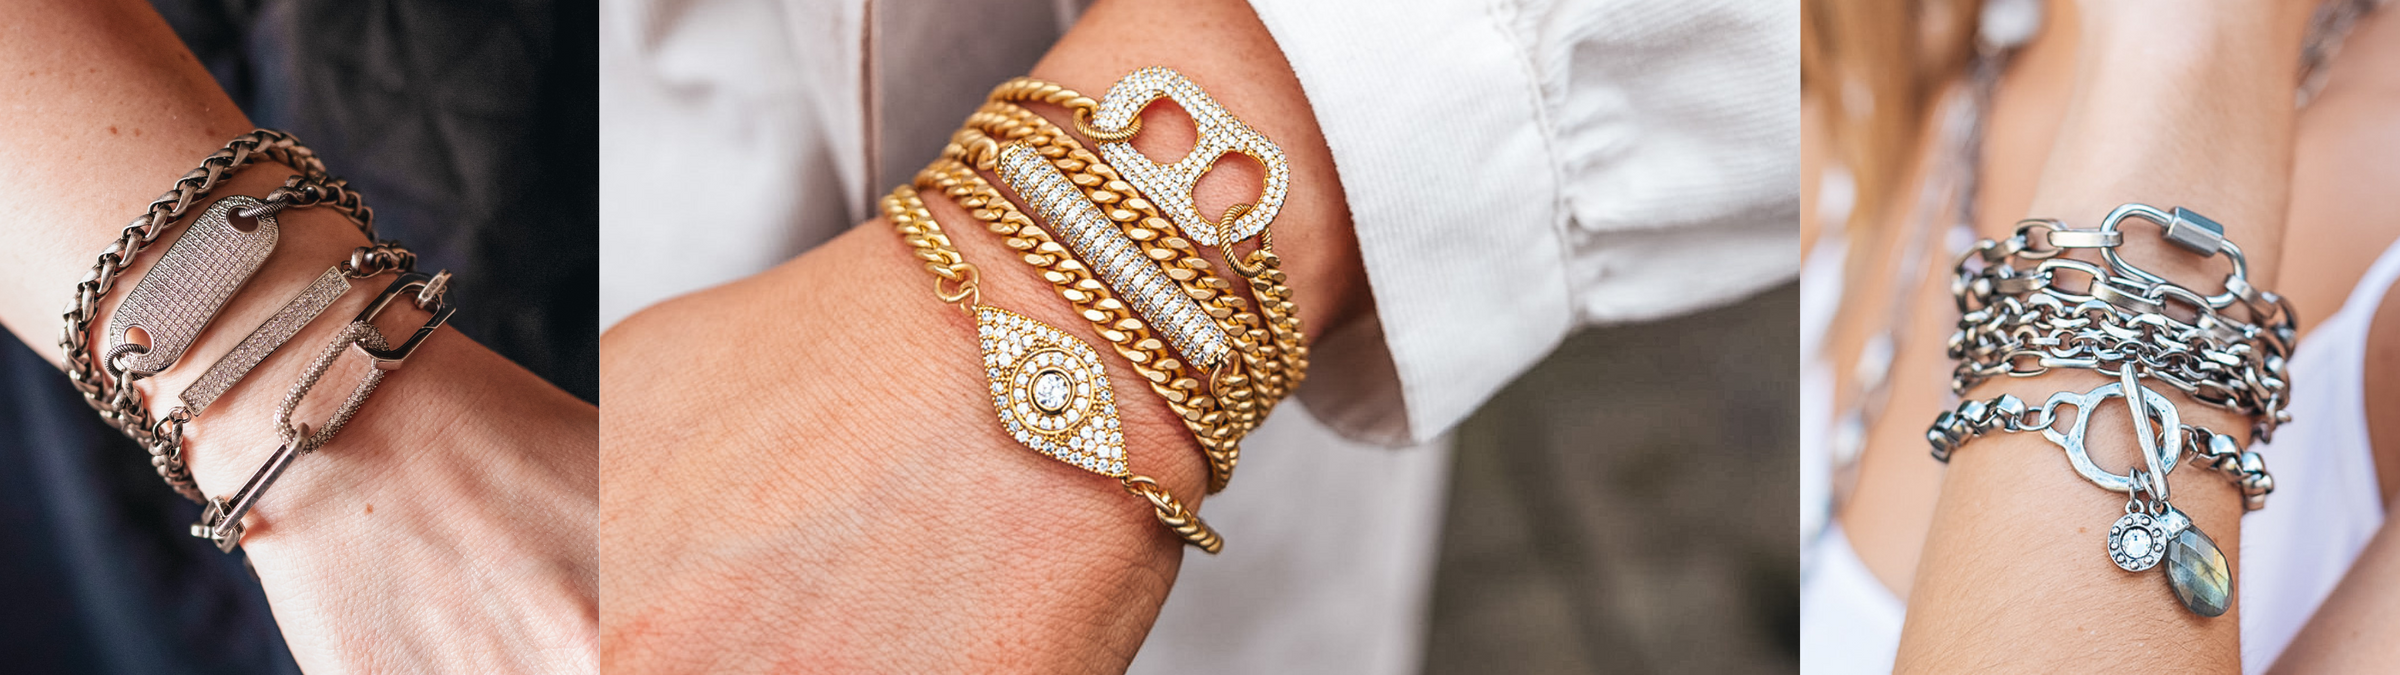 Loni Paul's handcrafted wrist stacking bracelets – embrace your bold style.